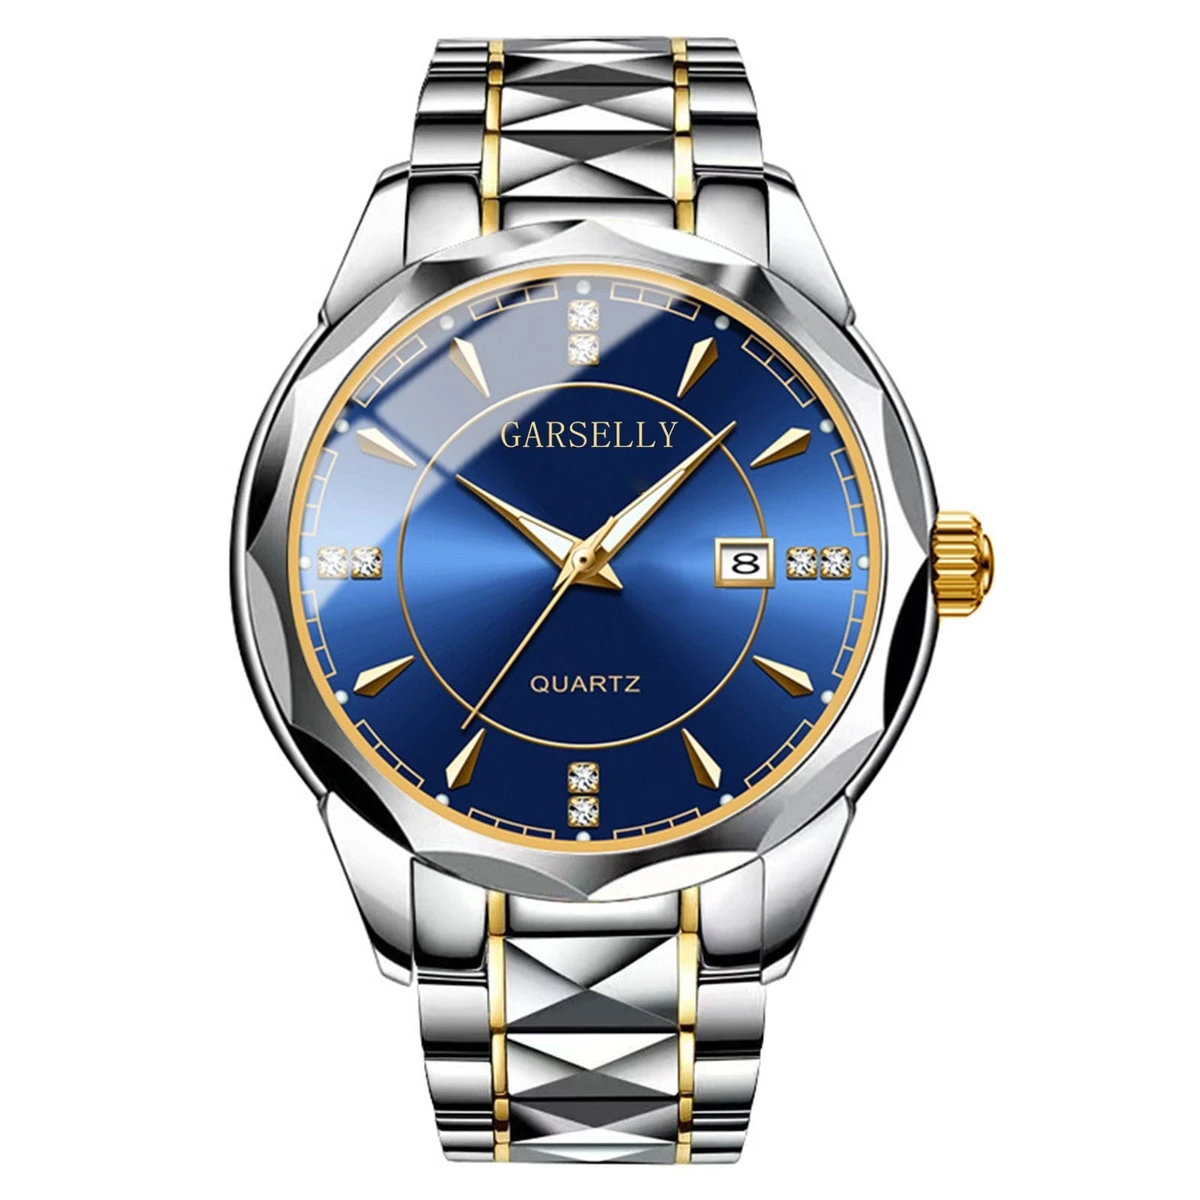 GARSELLY - Luxury Man Wristwatch Waterproof Watch for Men Stainless Steel Men's Watches High Quality+Box- Silver&Blue